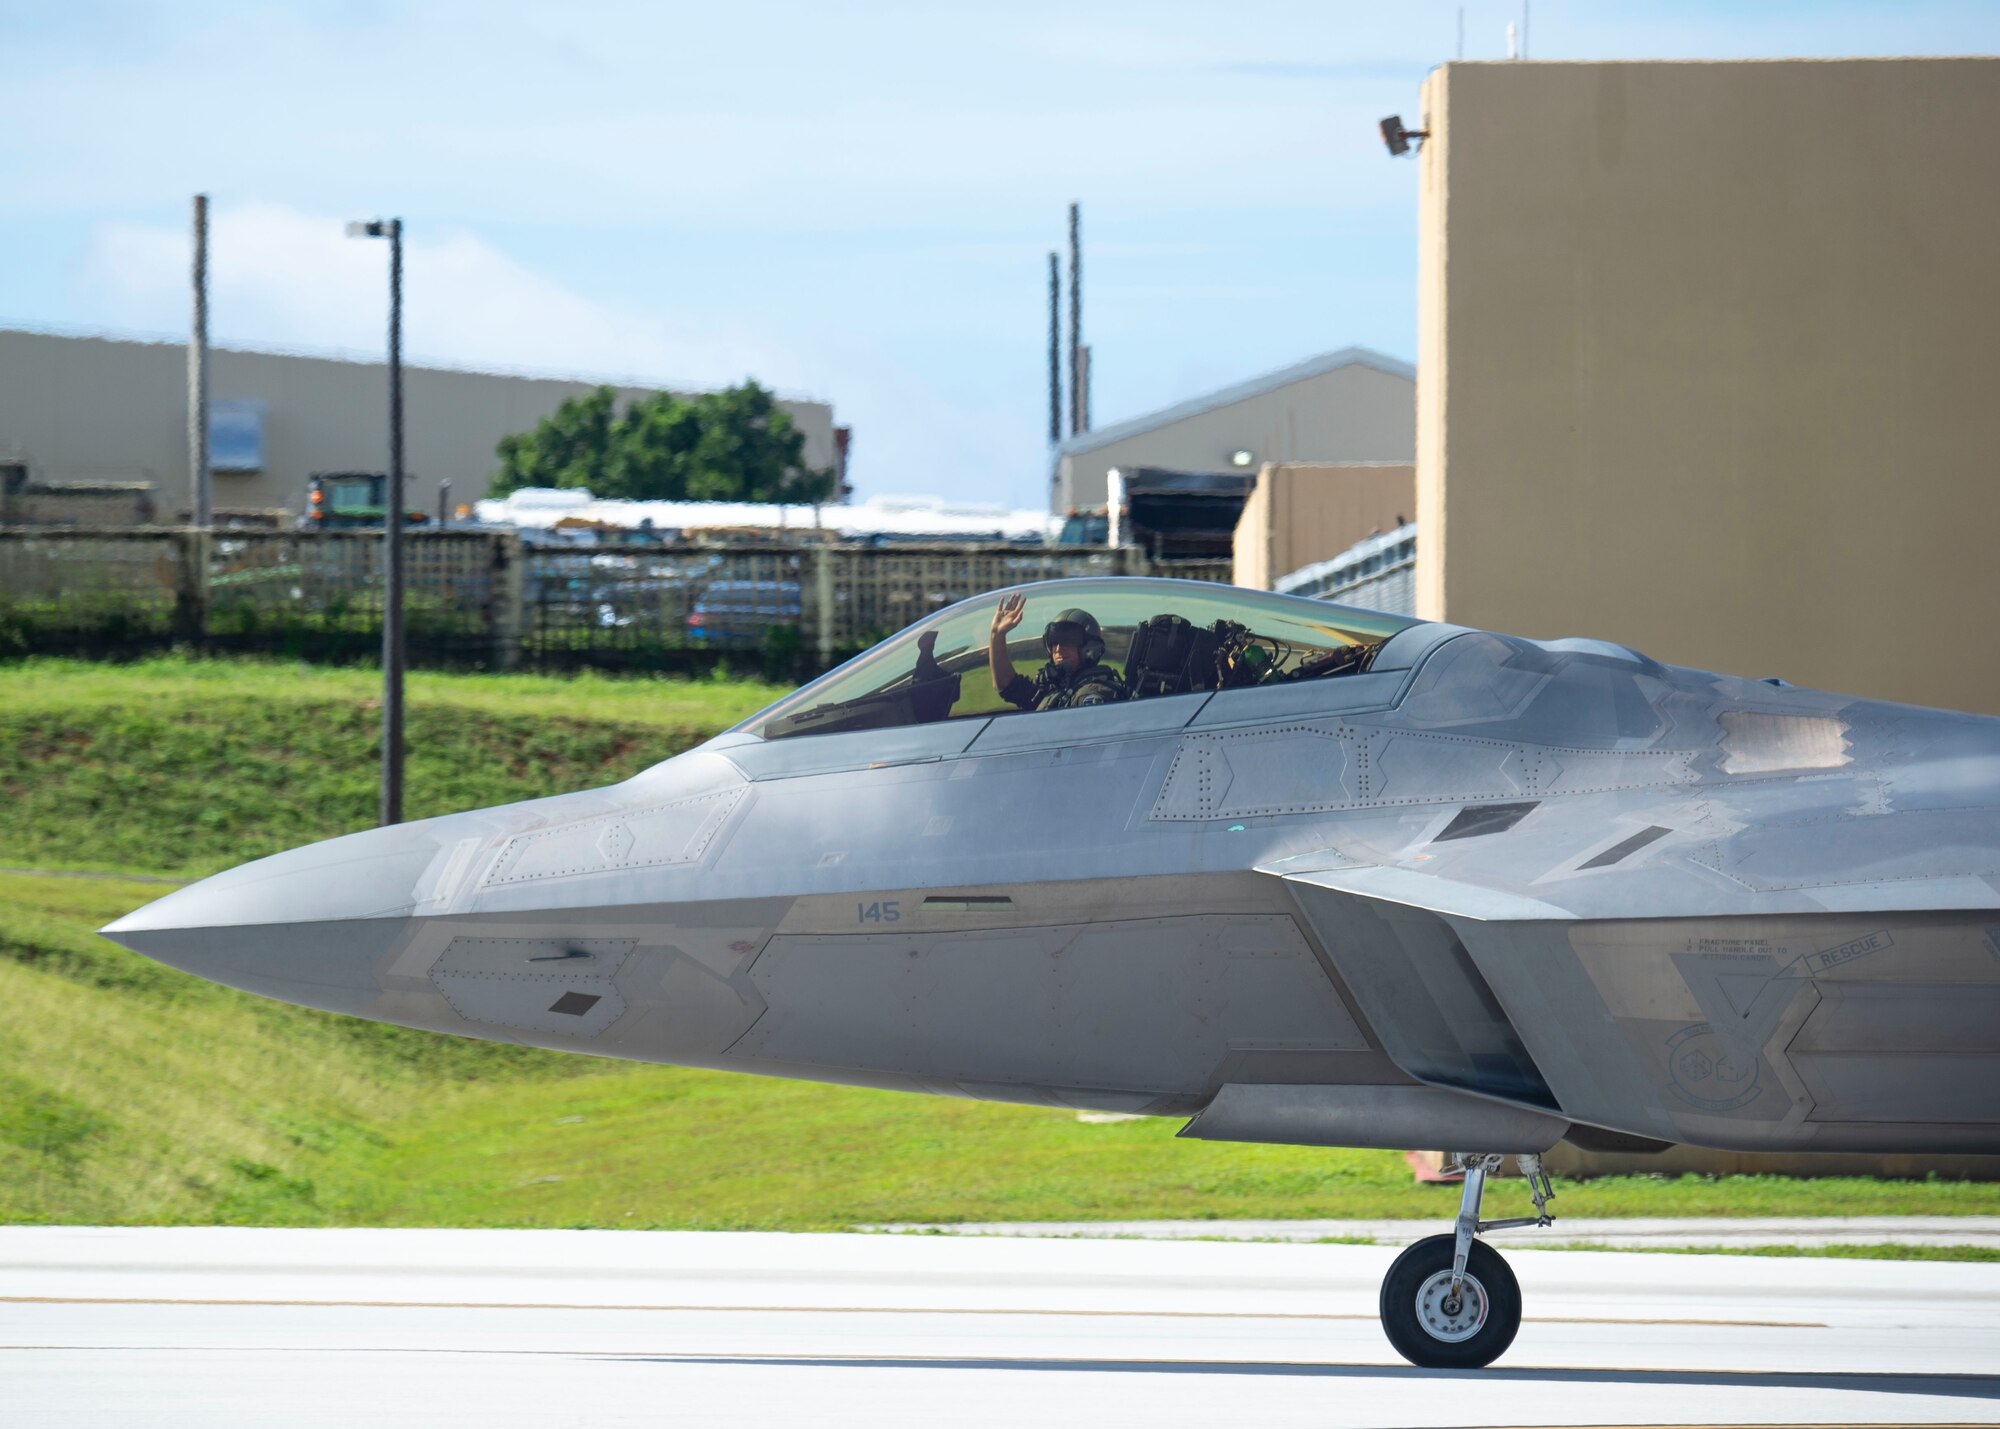 A U.S. Air Force F-22 Raptor Pilot assigned to the 525th Fighter Squadron, Joint Base Elmendorf-Richardson, Alaska, waves to a crowd  during a flight line engagement for Pacific Iron 2021 at Andersen Air Force Base, Guam, Aug. 4, 2021. PACIRON focuses on deploying, operating, and sustaining forces from smaller, dispersed bases in the Indo-Pacific region. A free and open Indo-Pacific region provides prosperity and security for all. (U.S. Air Force photo by Senior Airman Aubree Owens)